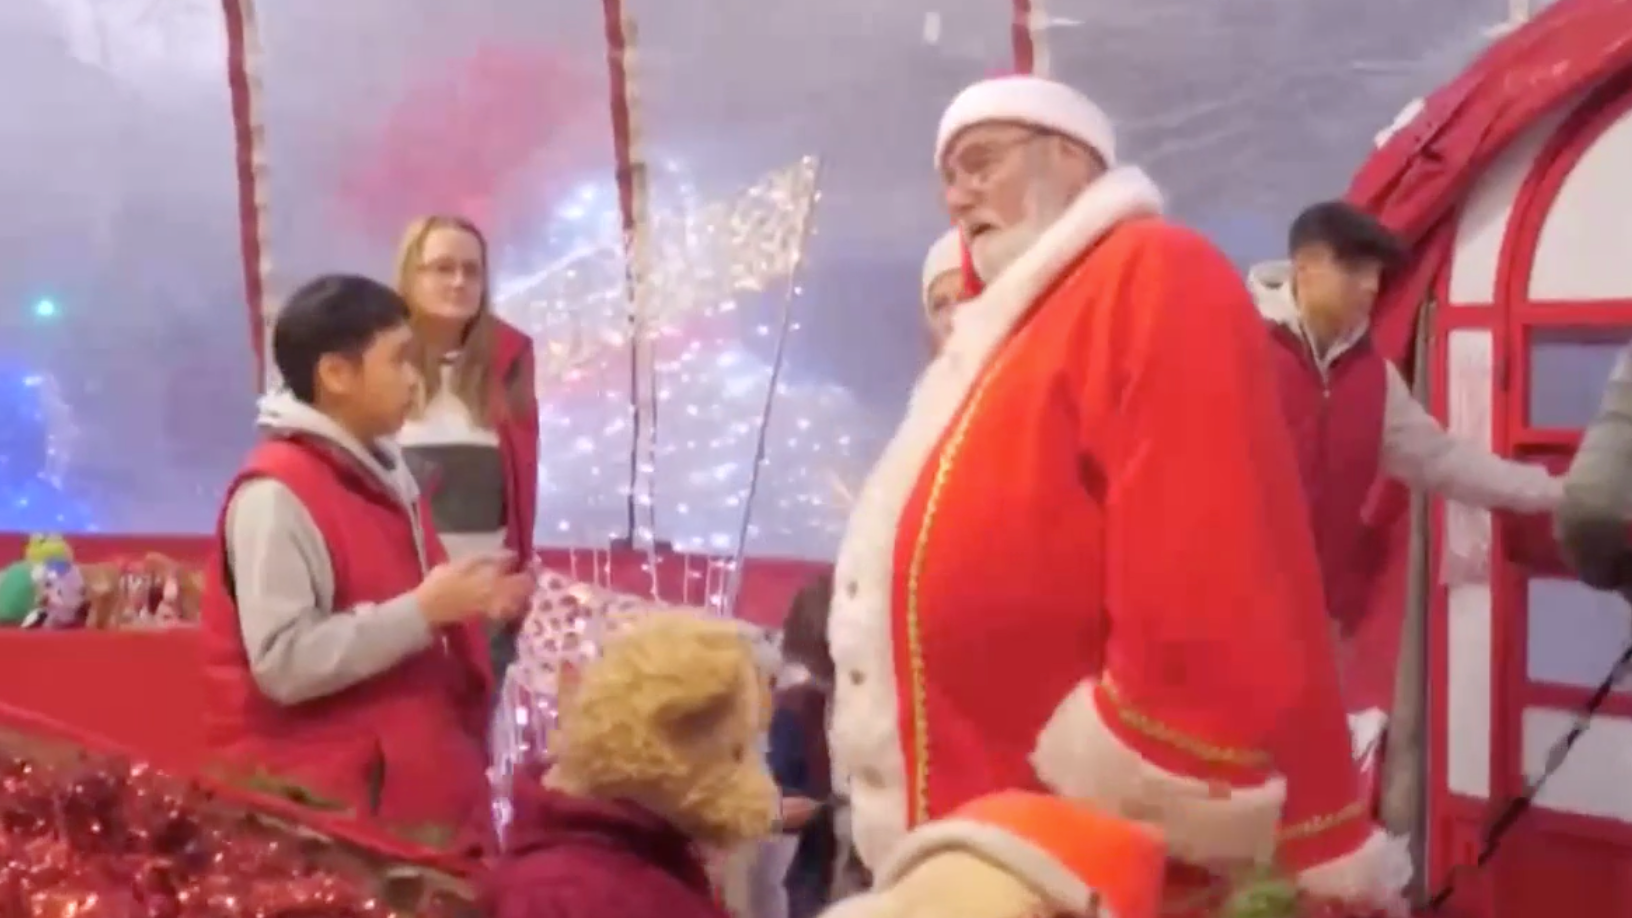 Hungary's oldest Christmas charity, Santa's Factory, is one of many charities across the country struggling this holiday season. /CGTN